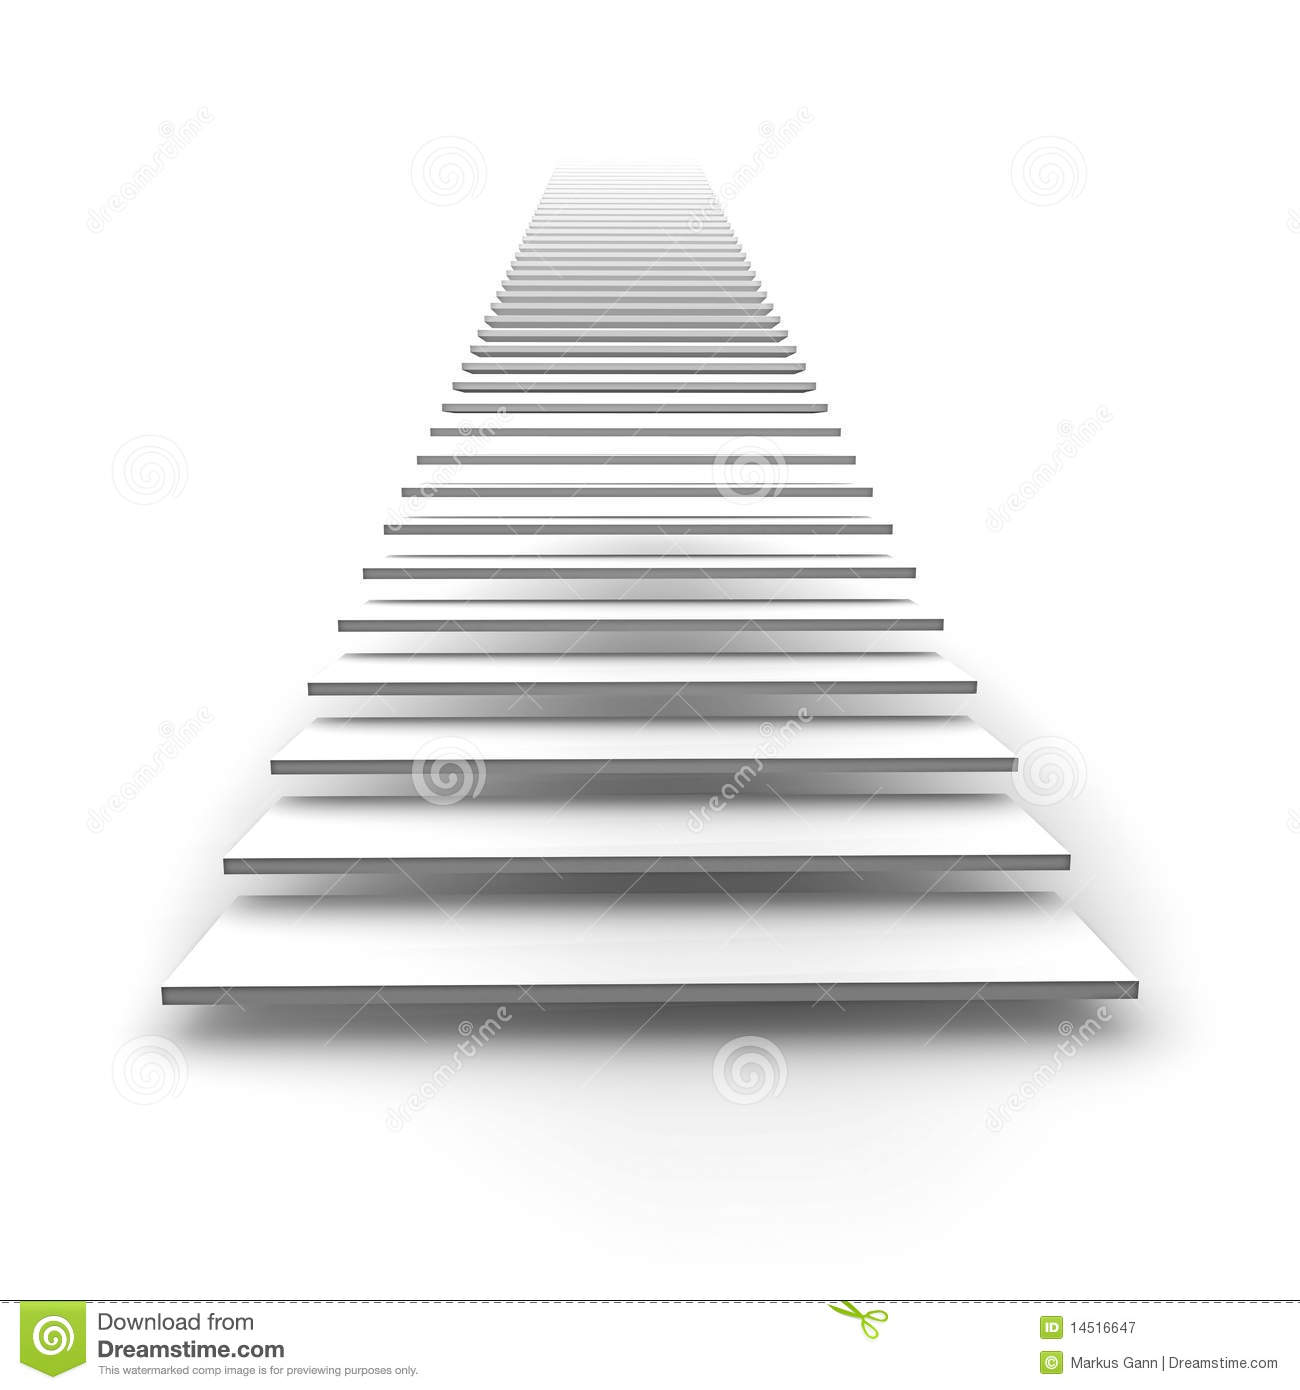 Stairway To Heaven Royalty Free Stock Photography   Image  14516647